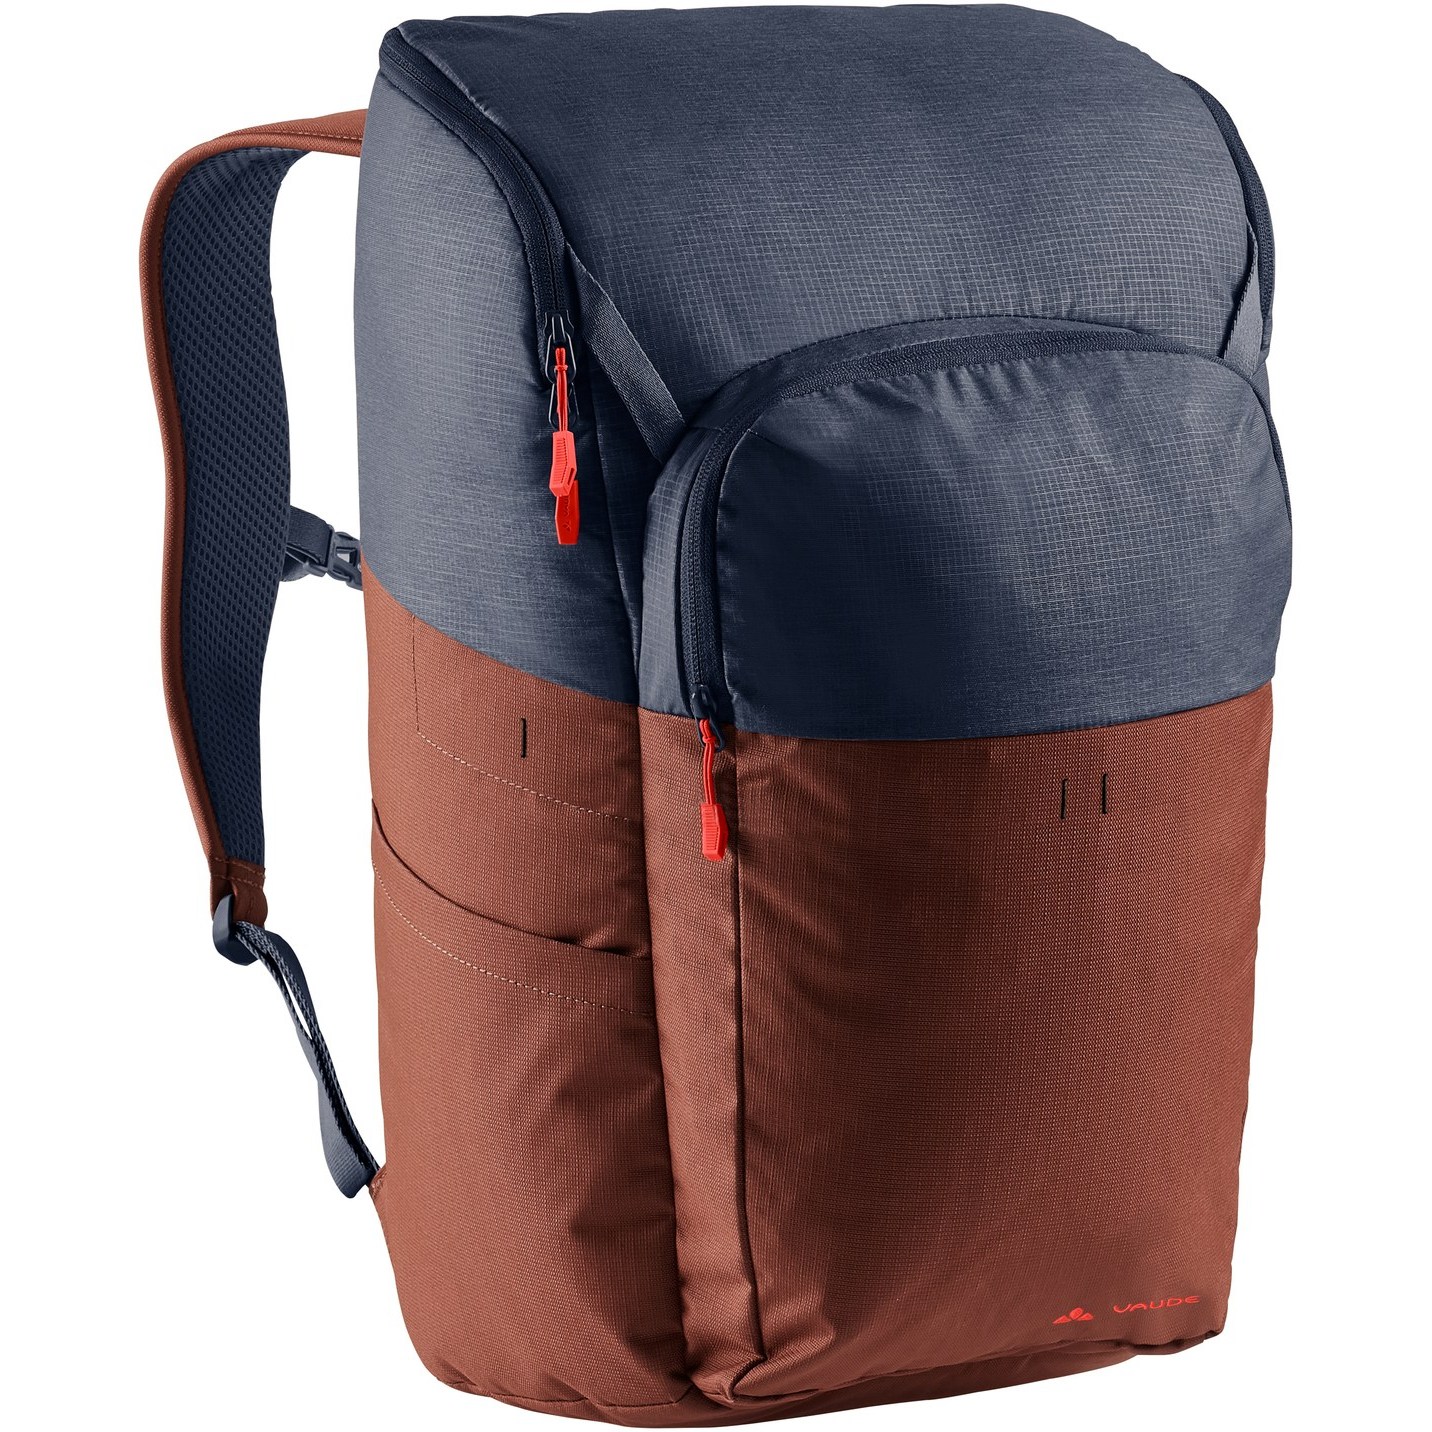 Picture of Vaude Albali Backpack - 32L - chocolate